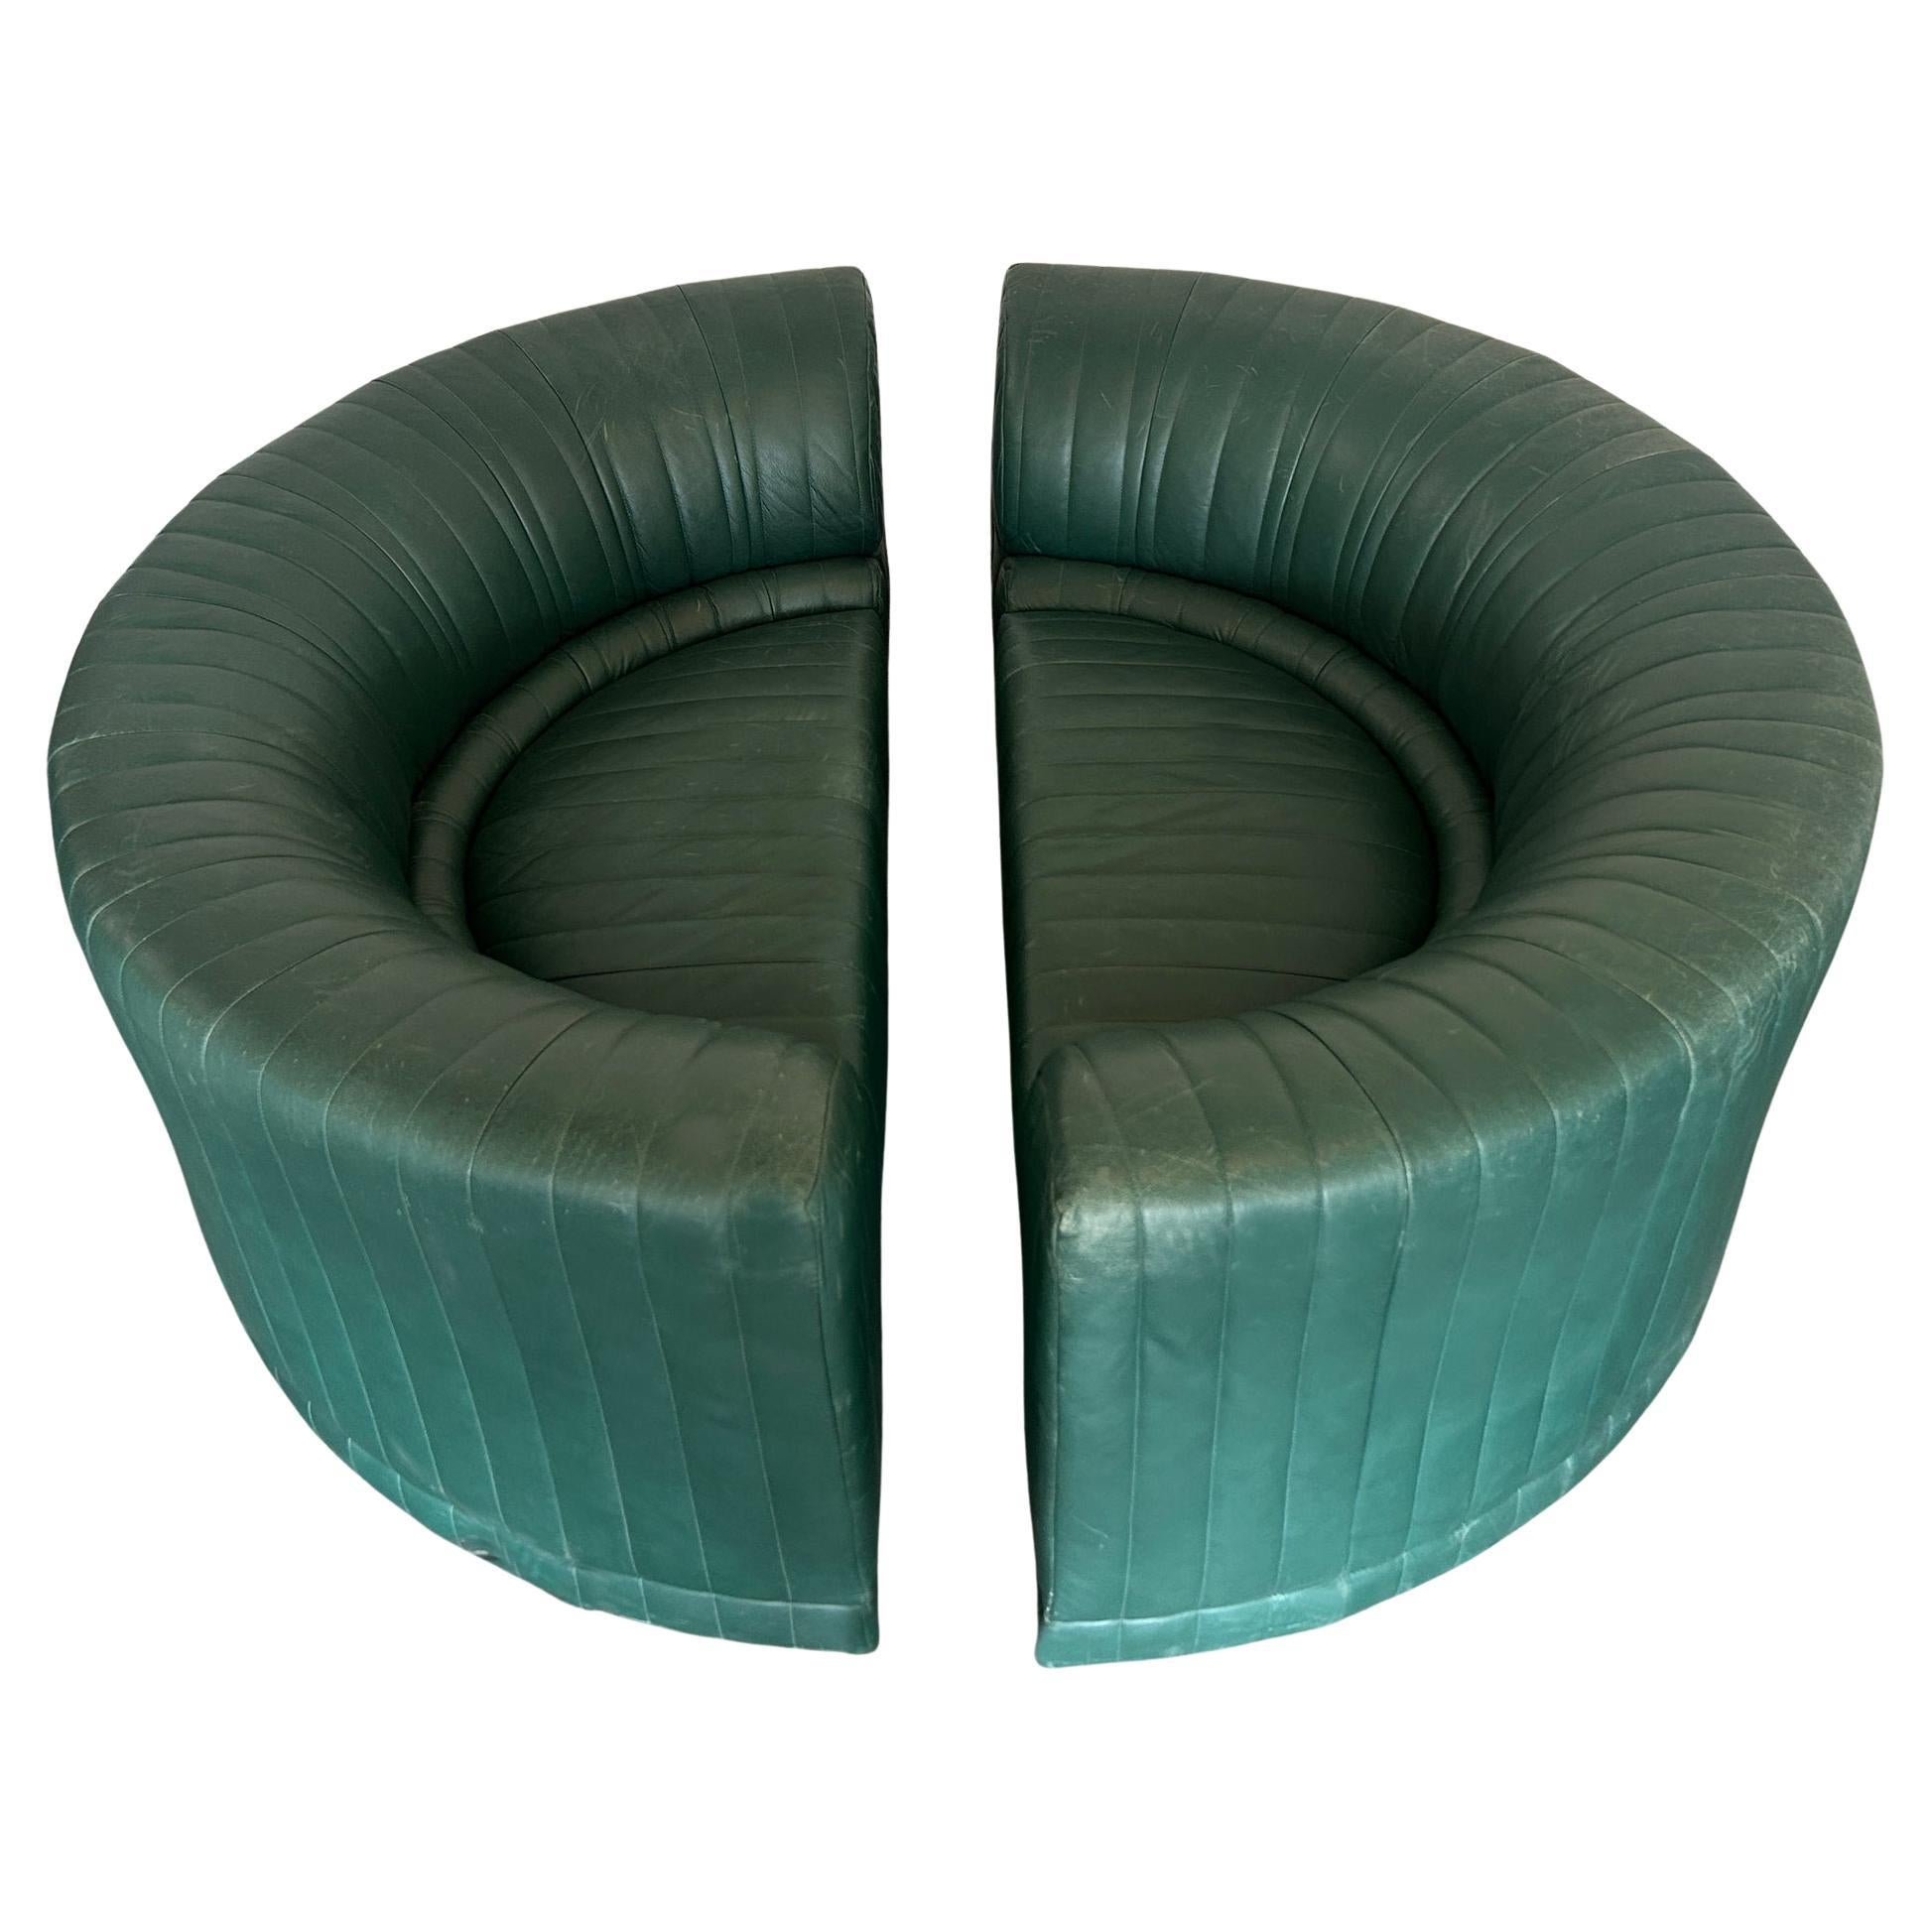 Pair Post Modern Half Round Section of Roche Bobois Green Leather Sofas 1983 For Sale